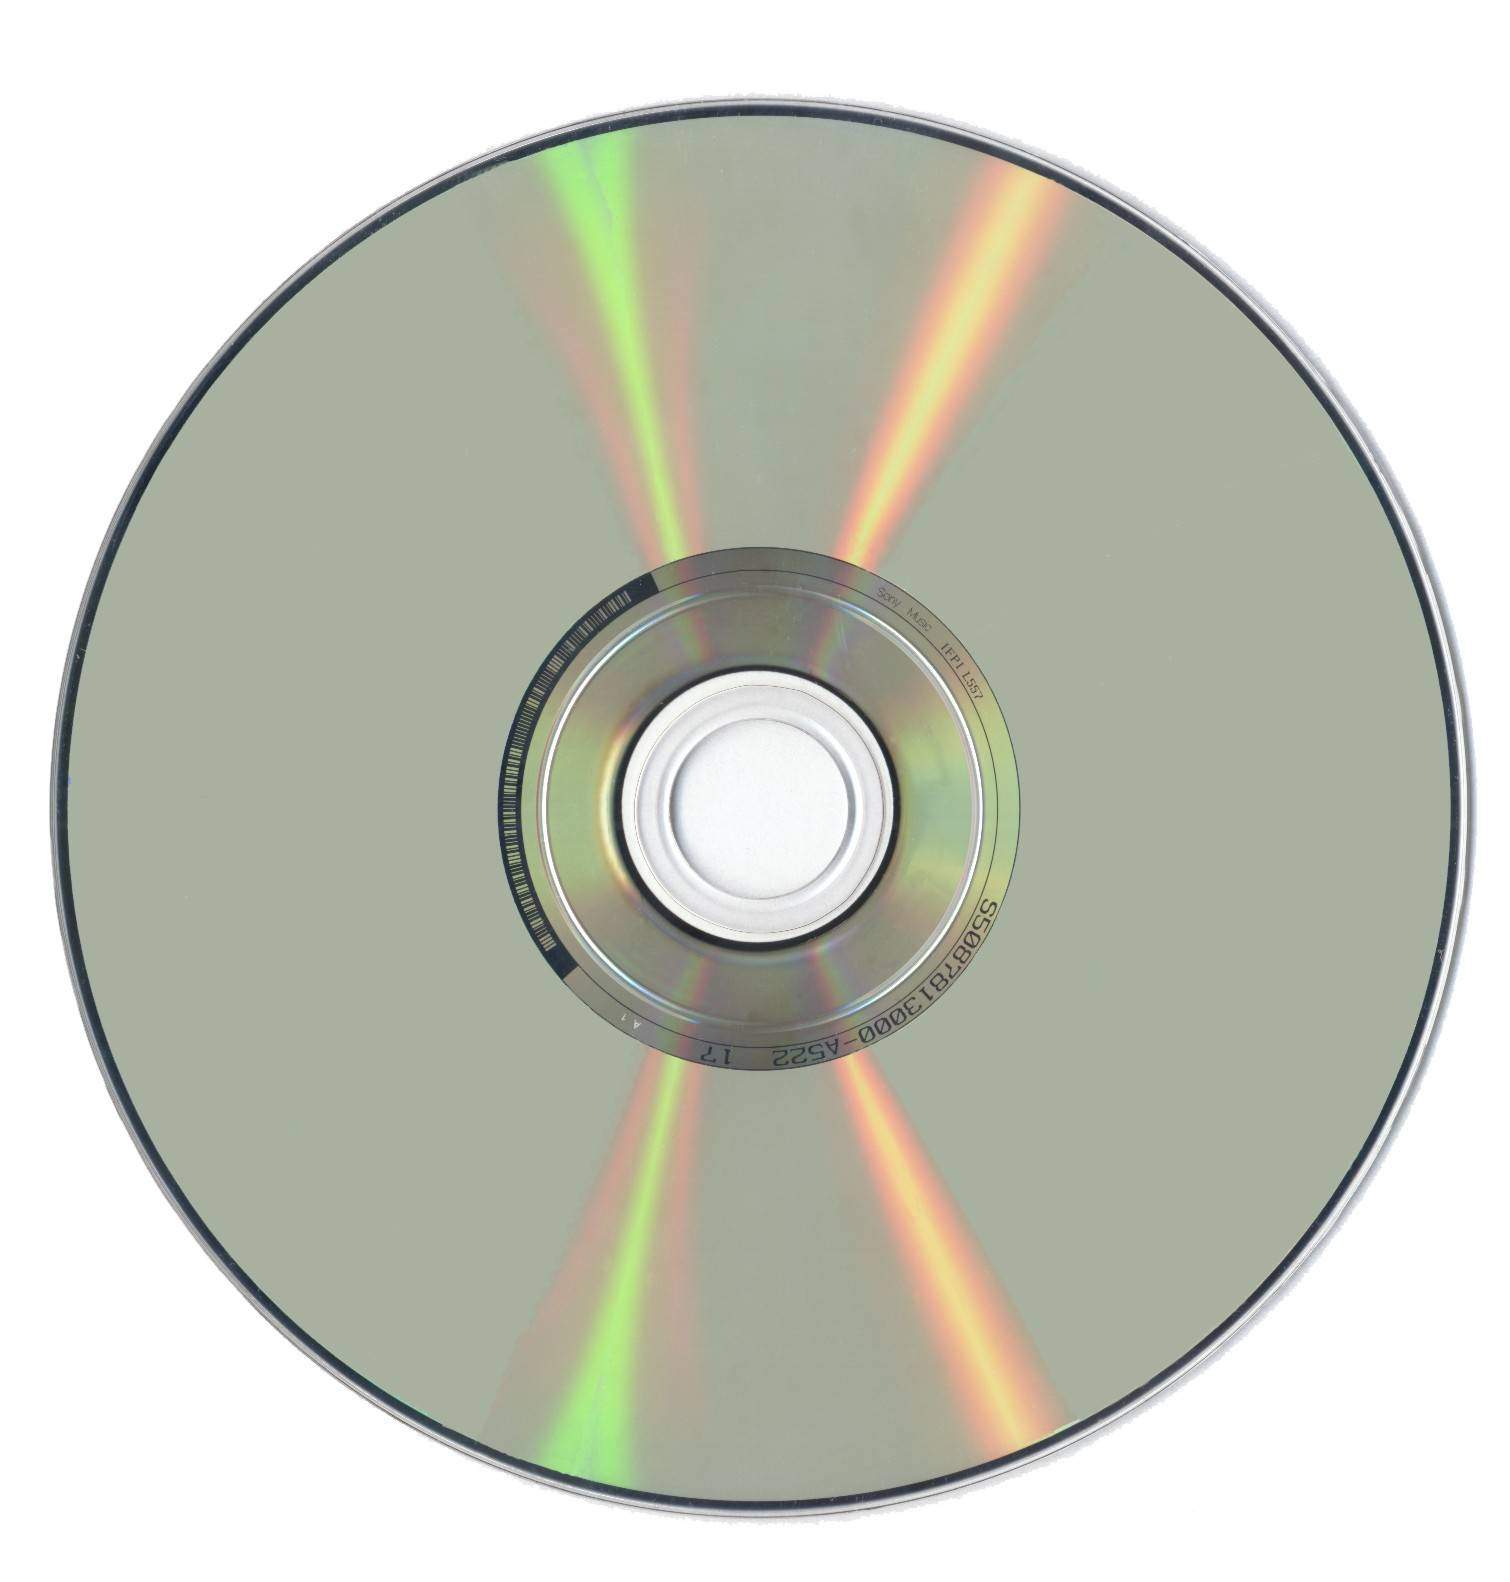 Image of the bottom side of a DVD